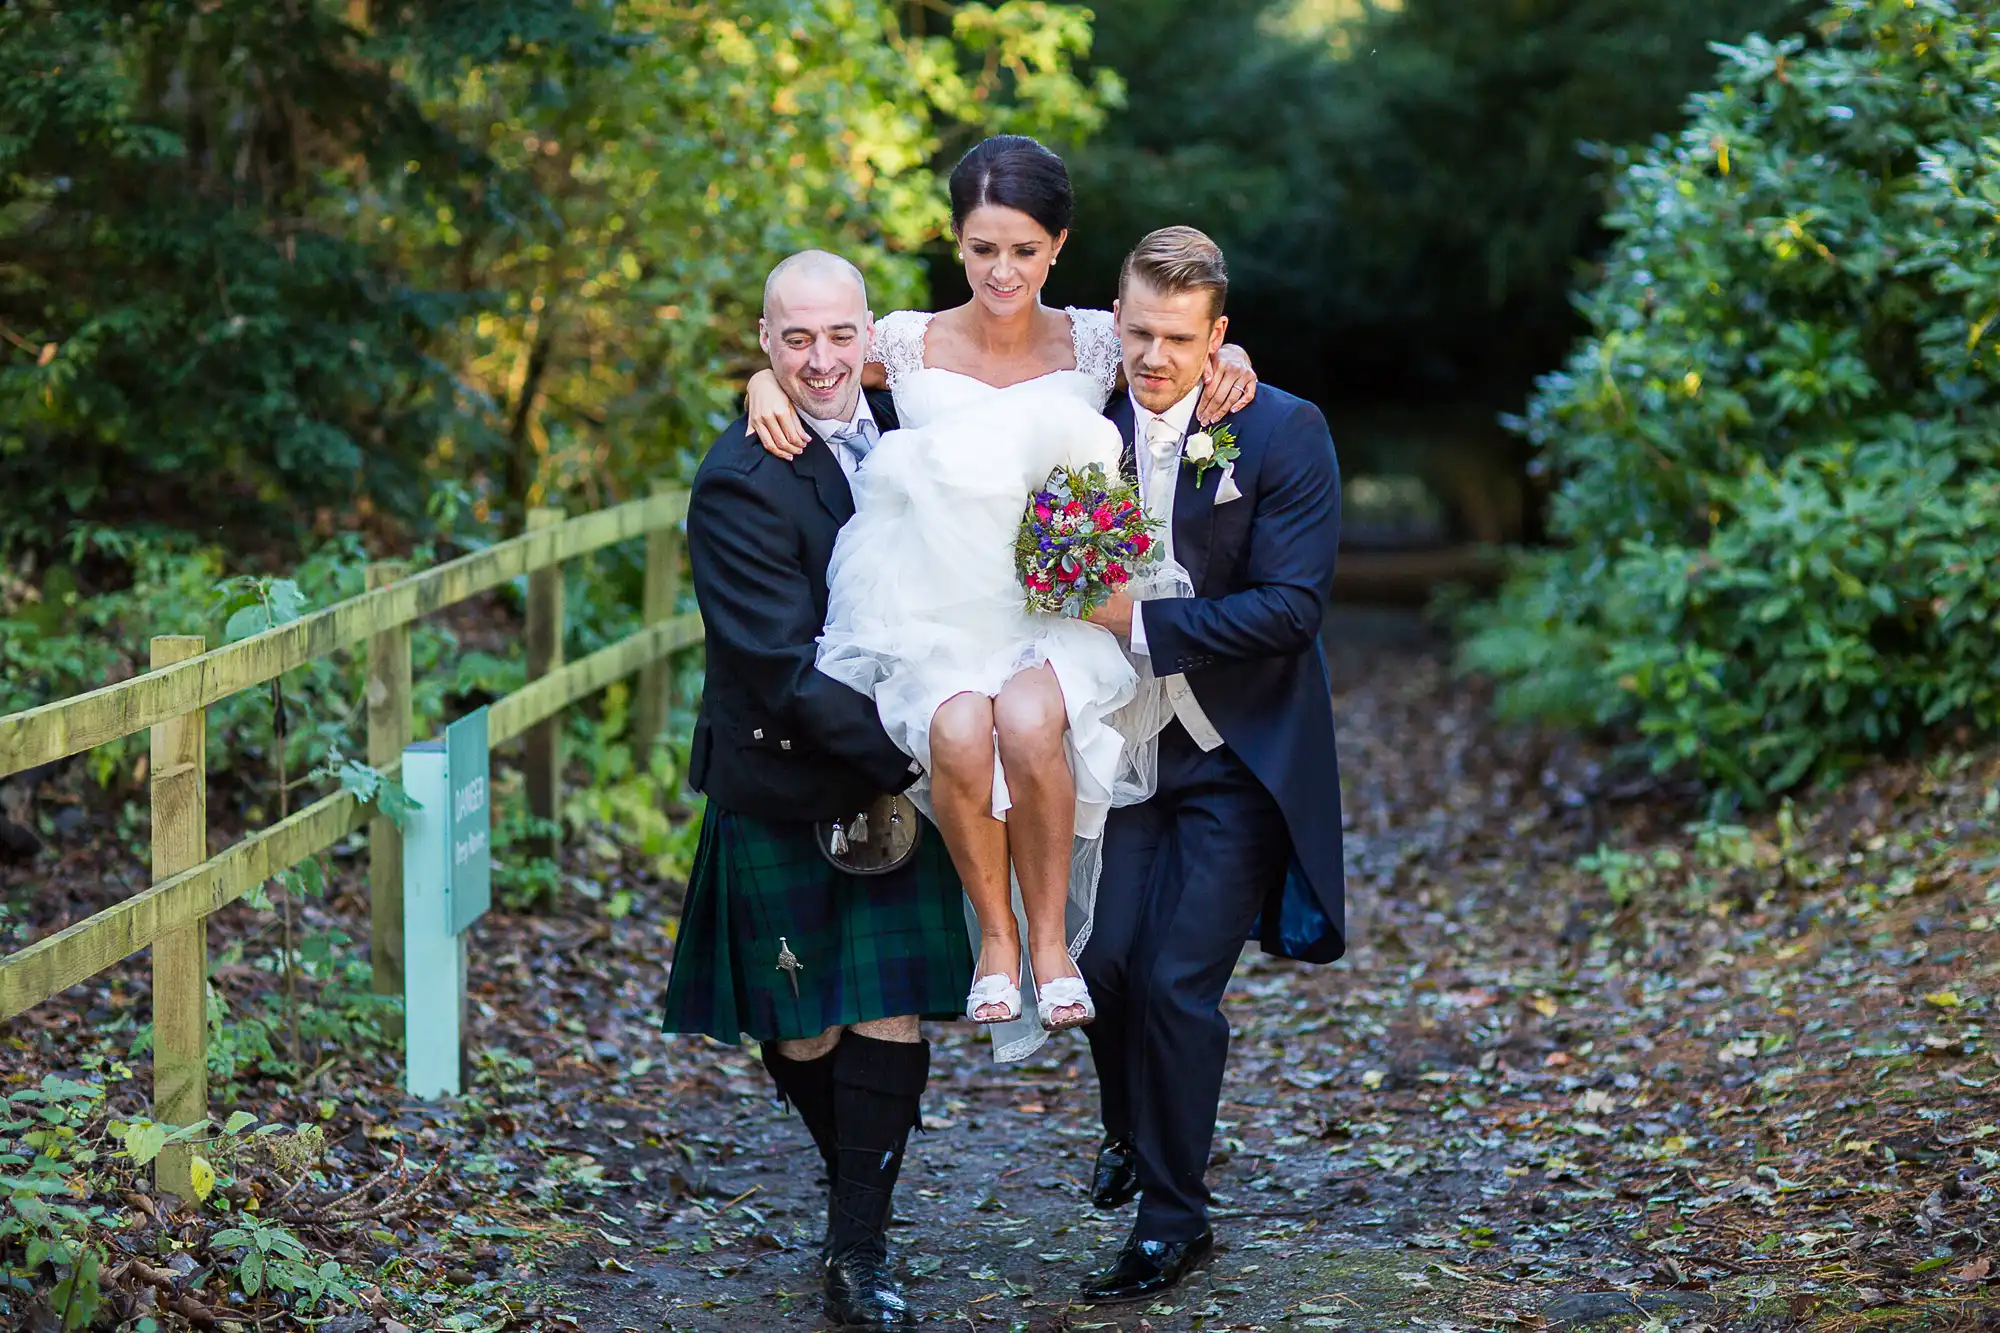 A bride being playfully carried by two men, one in a kilt, along a leaf-strewn path with green fencing.